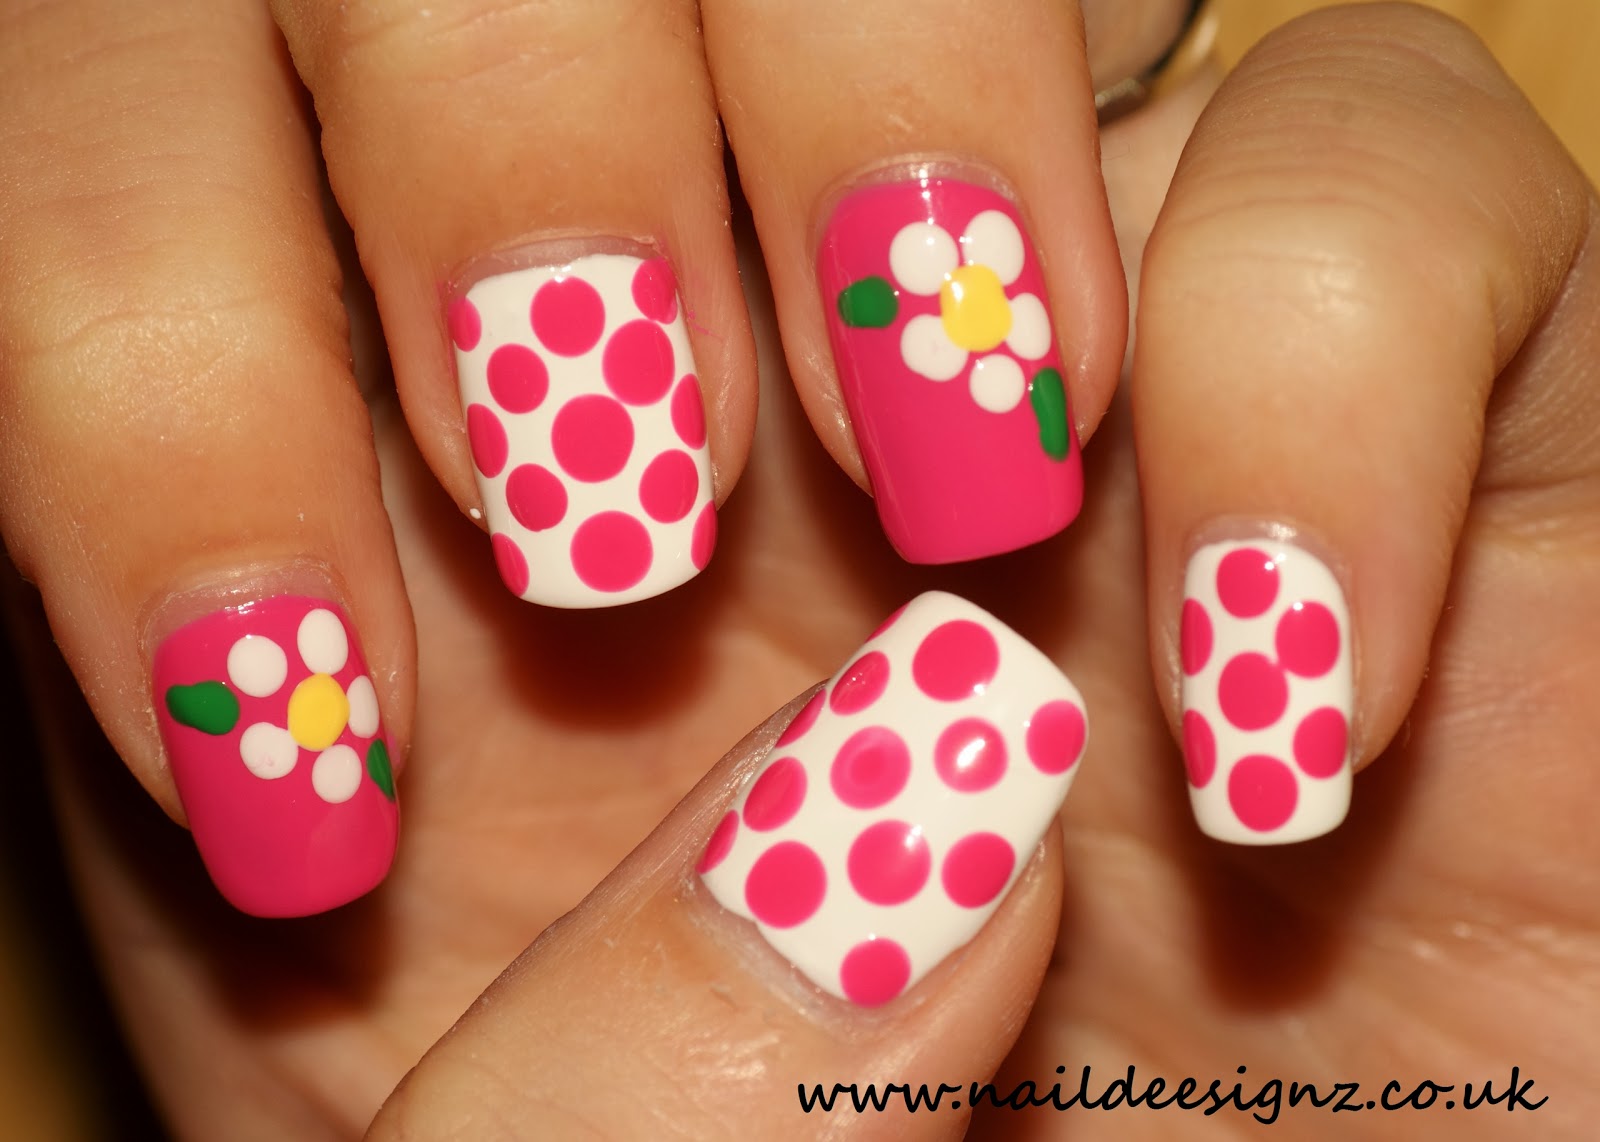 Polka Dot Nail Art Designs Without Tools for Beginners - wide 7